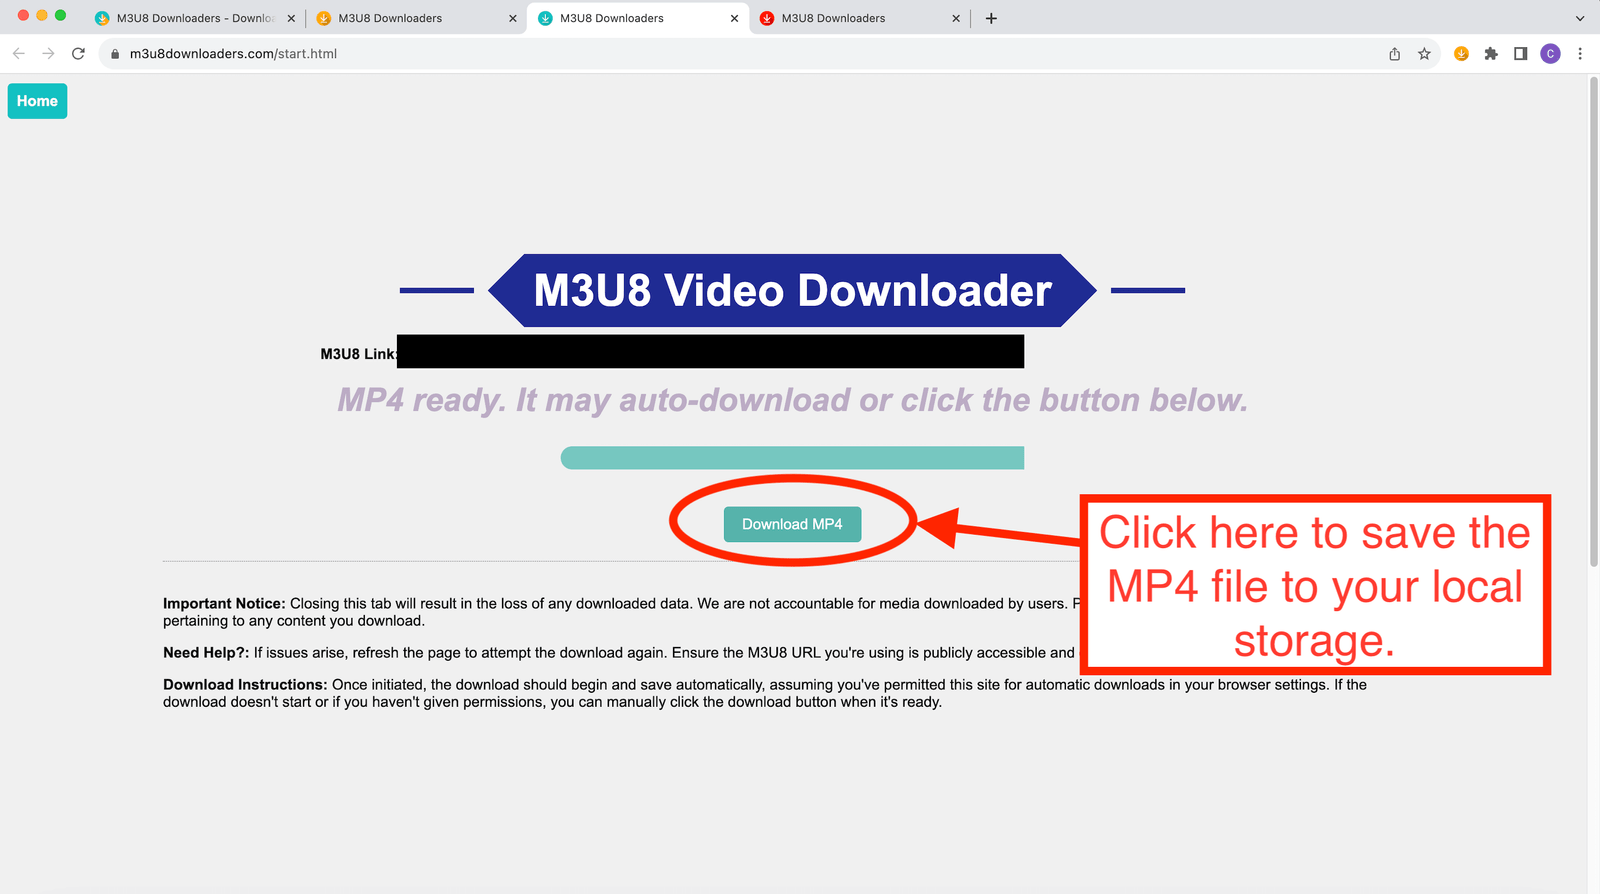 M3U8 Video Downloader - downloaded M3U8 and converted to MP4